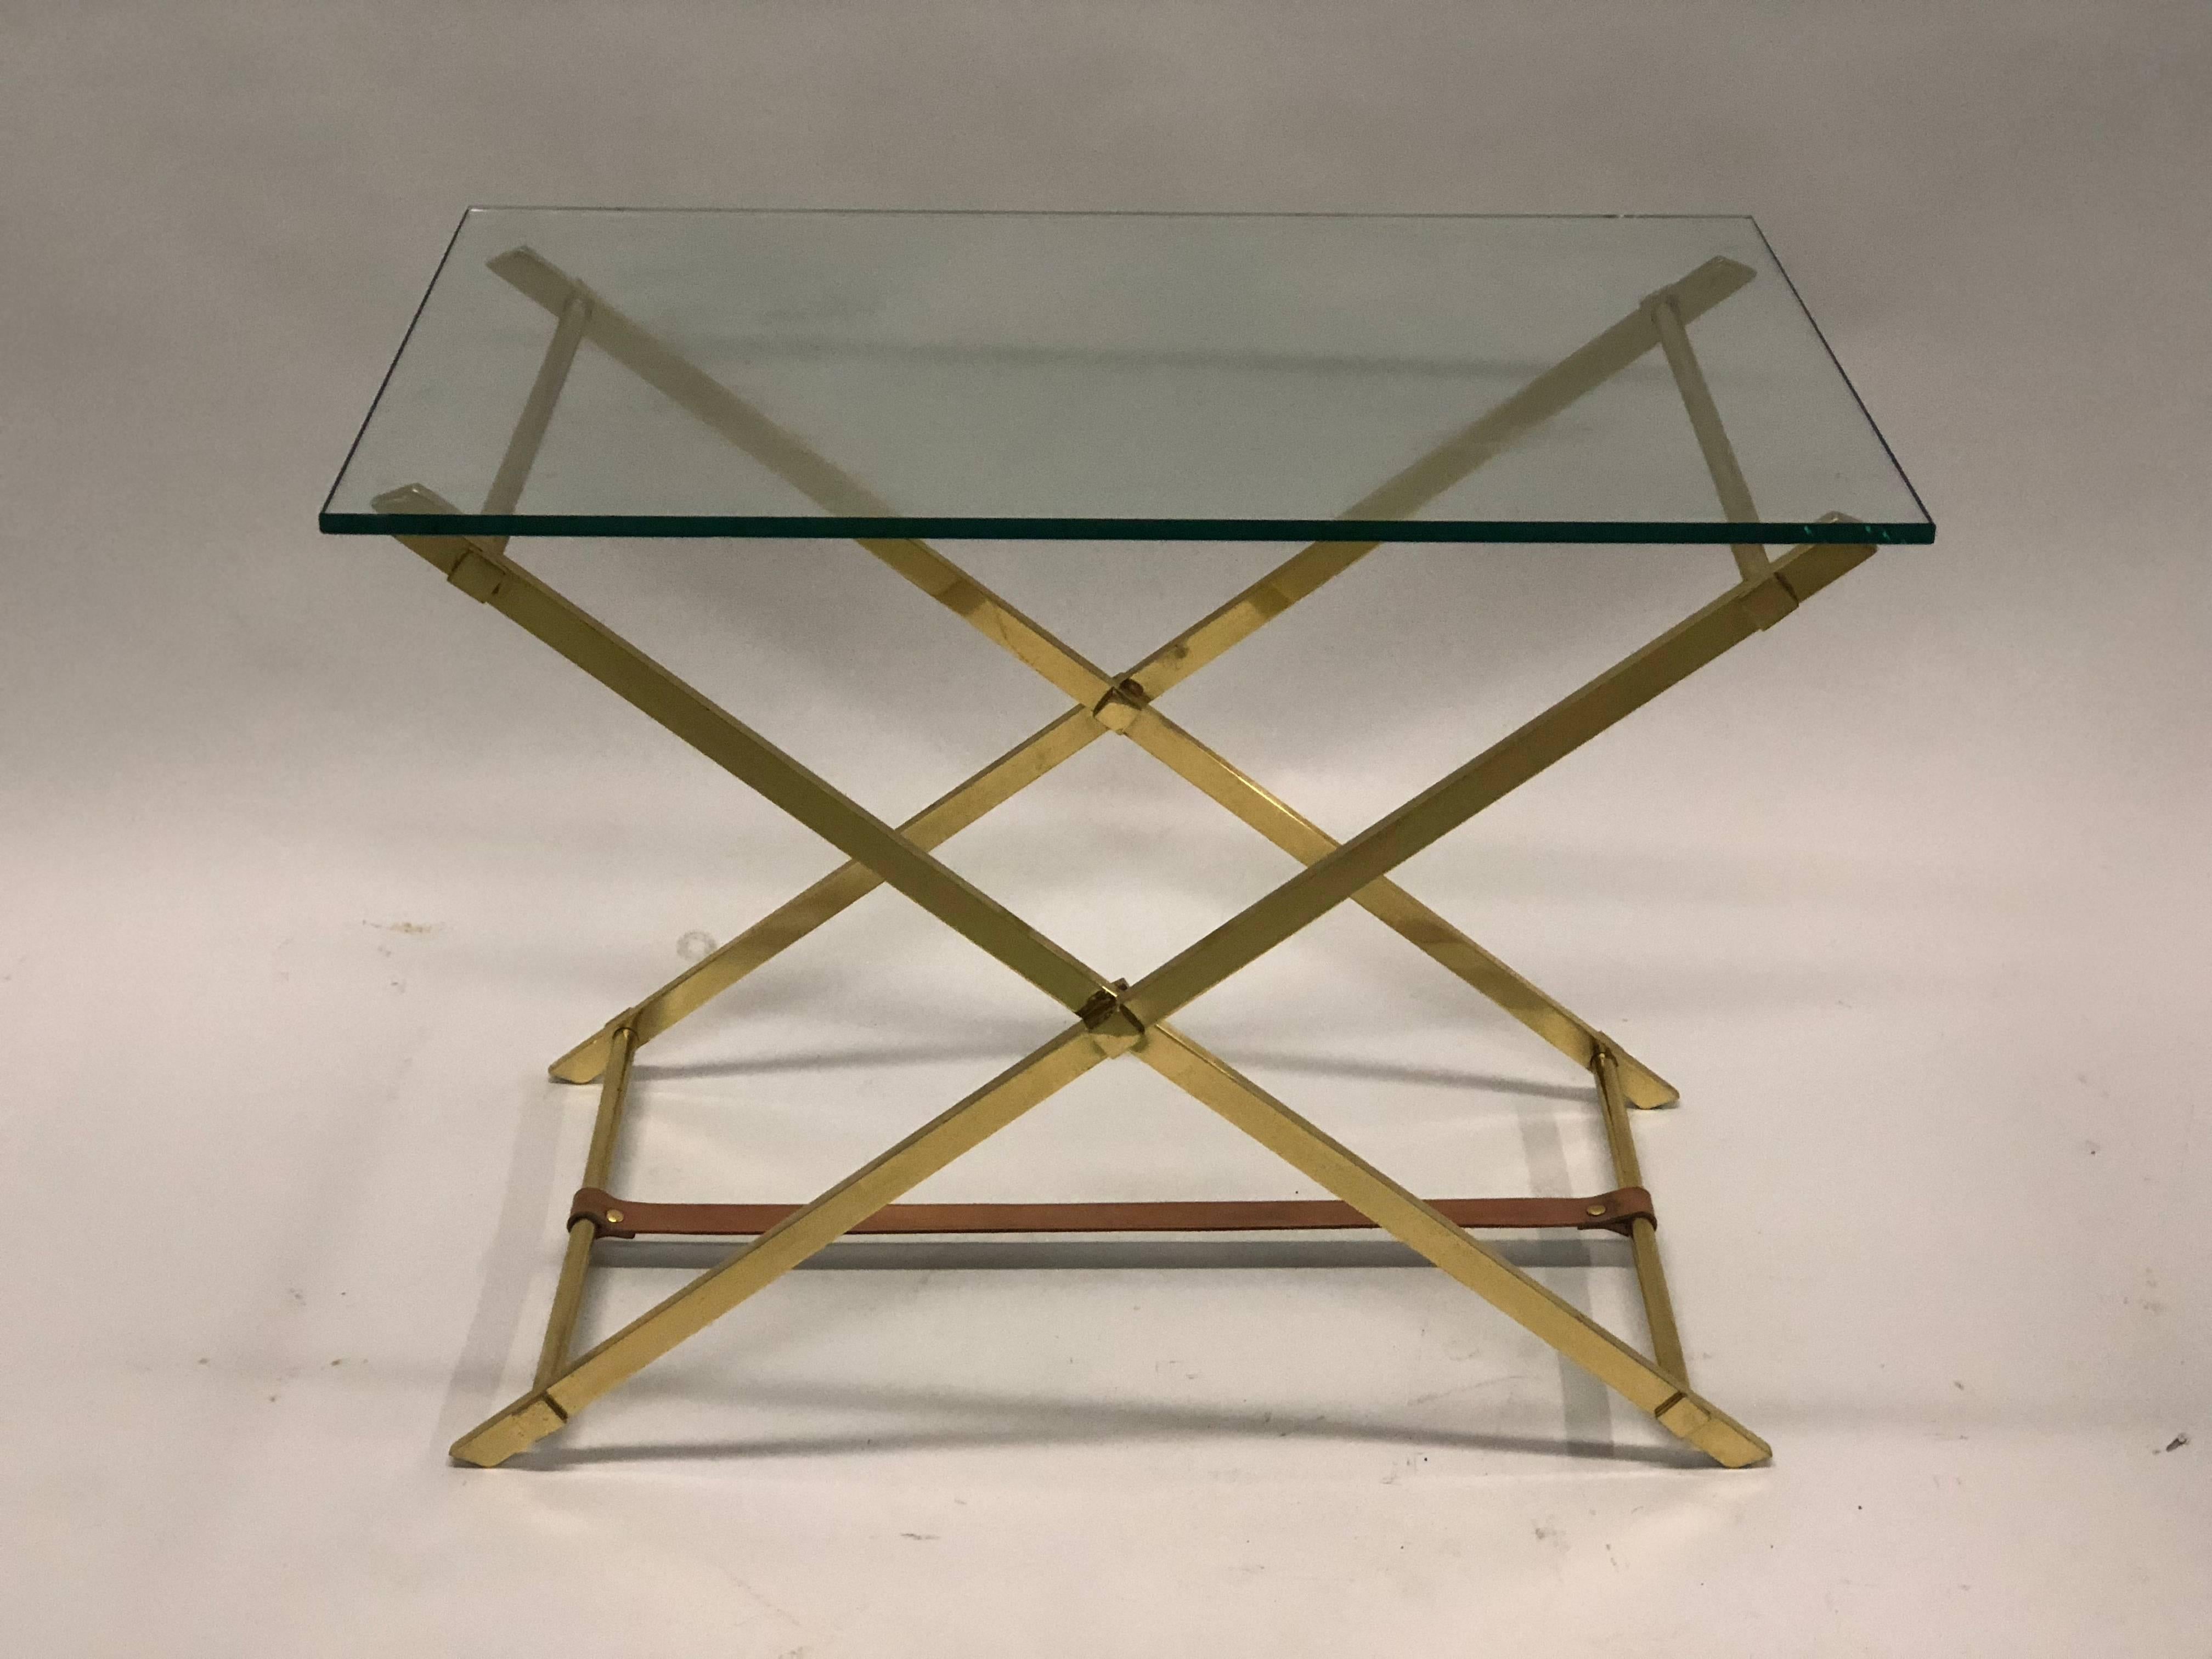 French Pair of Mid-Century Modern Brass, Leather and Glass Side Tables by Hermes